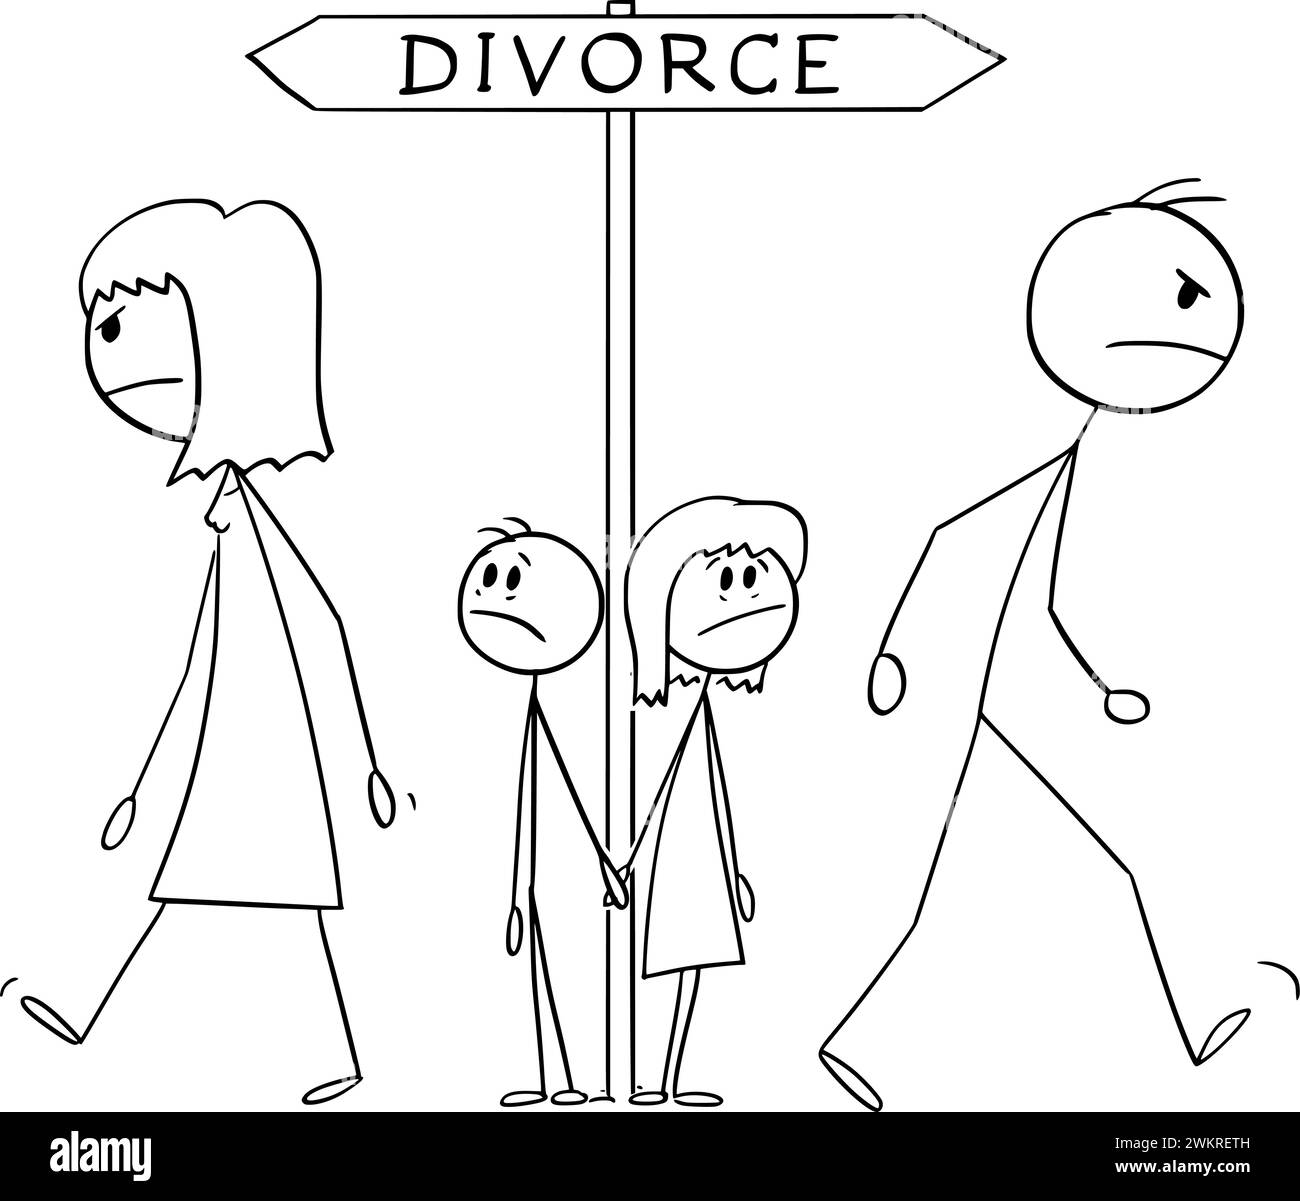 Husband and Wife in Divorce, Children Watching Their Separation, Vector Cartoon Stick Figure Illustration Stock Vector